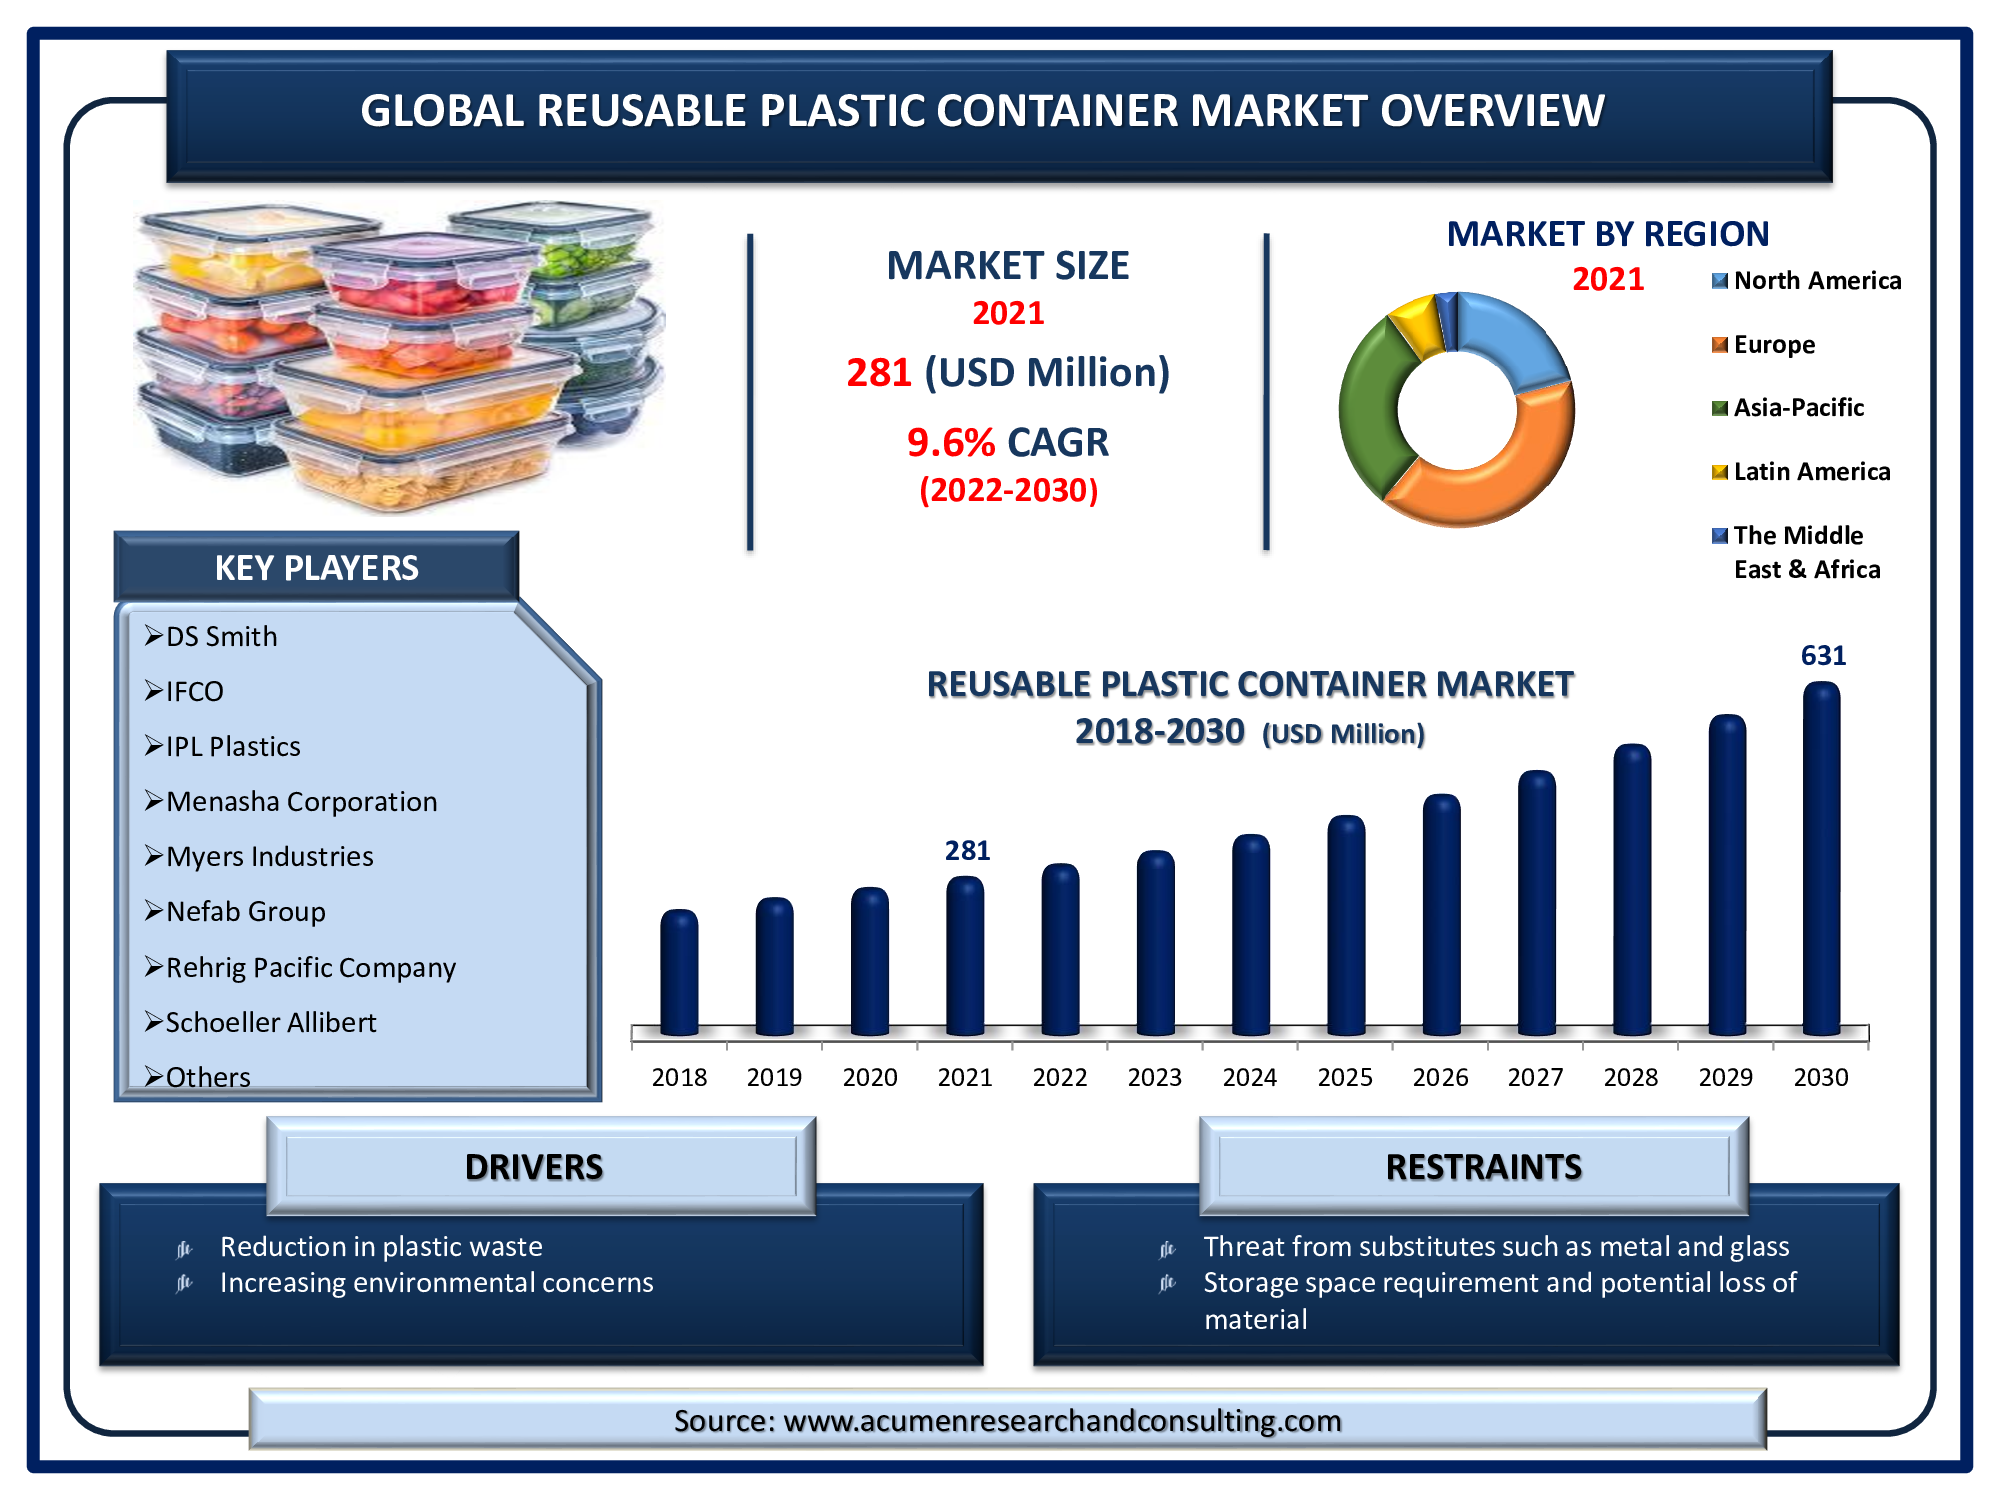 Reusable Plastic Container Market is estimated to reach the market value of USD 631 Million by 2030, with a CAGR of 9.6%